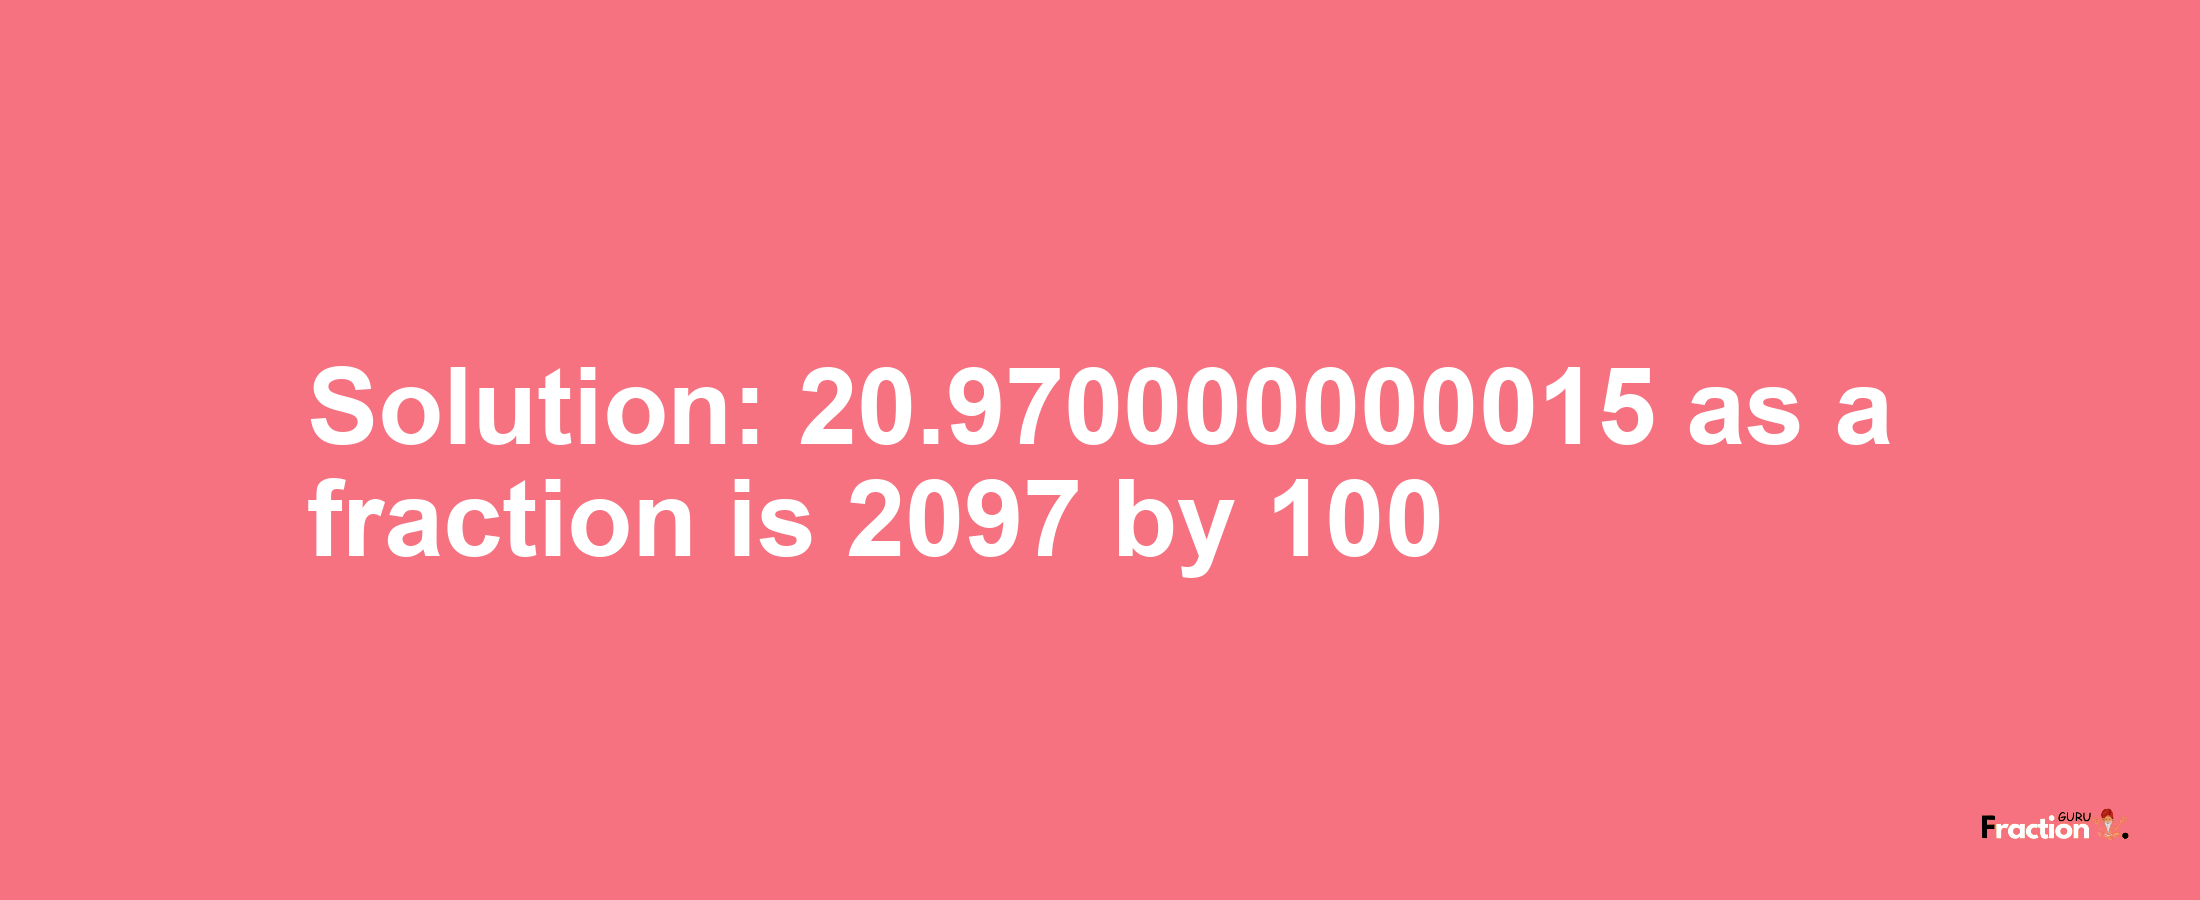 Solution:20.970000000015 as a fraction is 2097/100